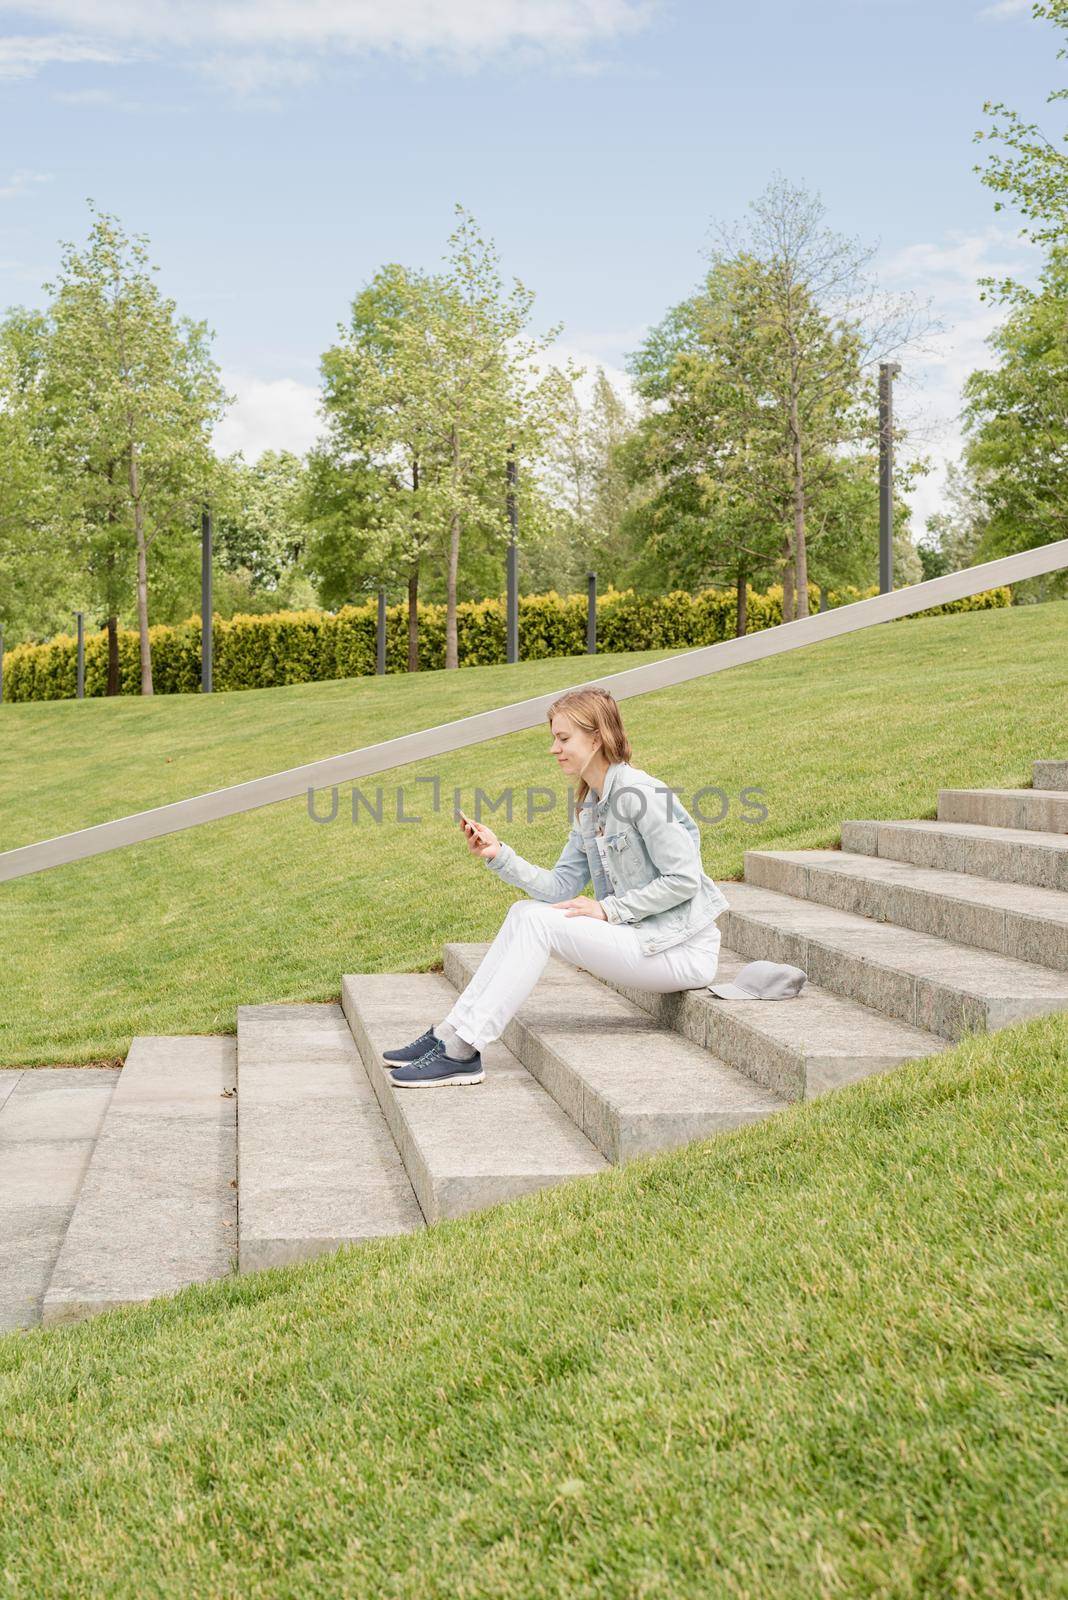 Woman in jeans clothes texting on her mobile phone, sitting on the stairs in the park